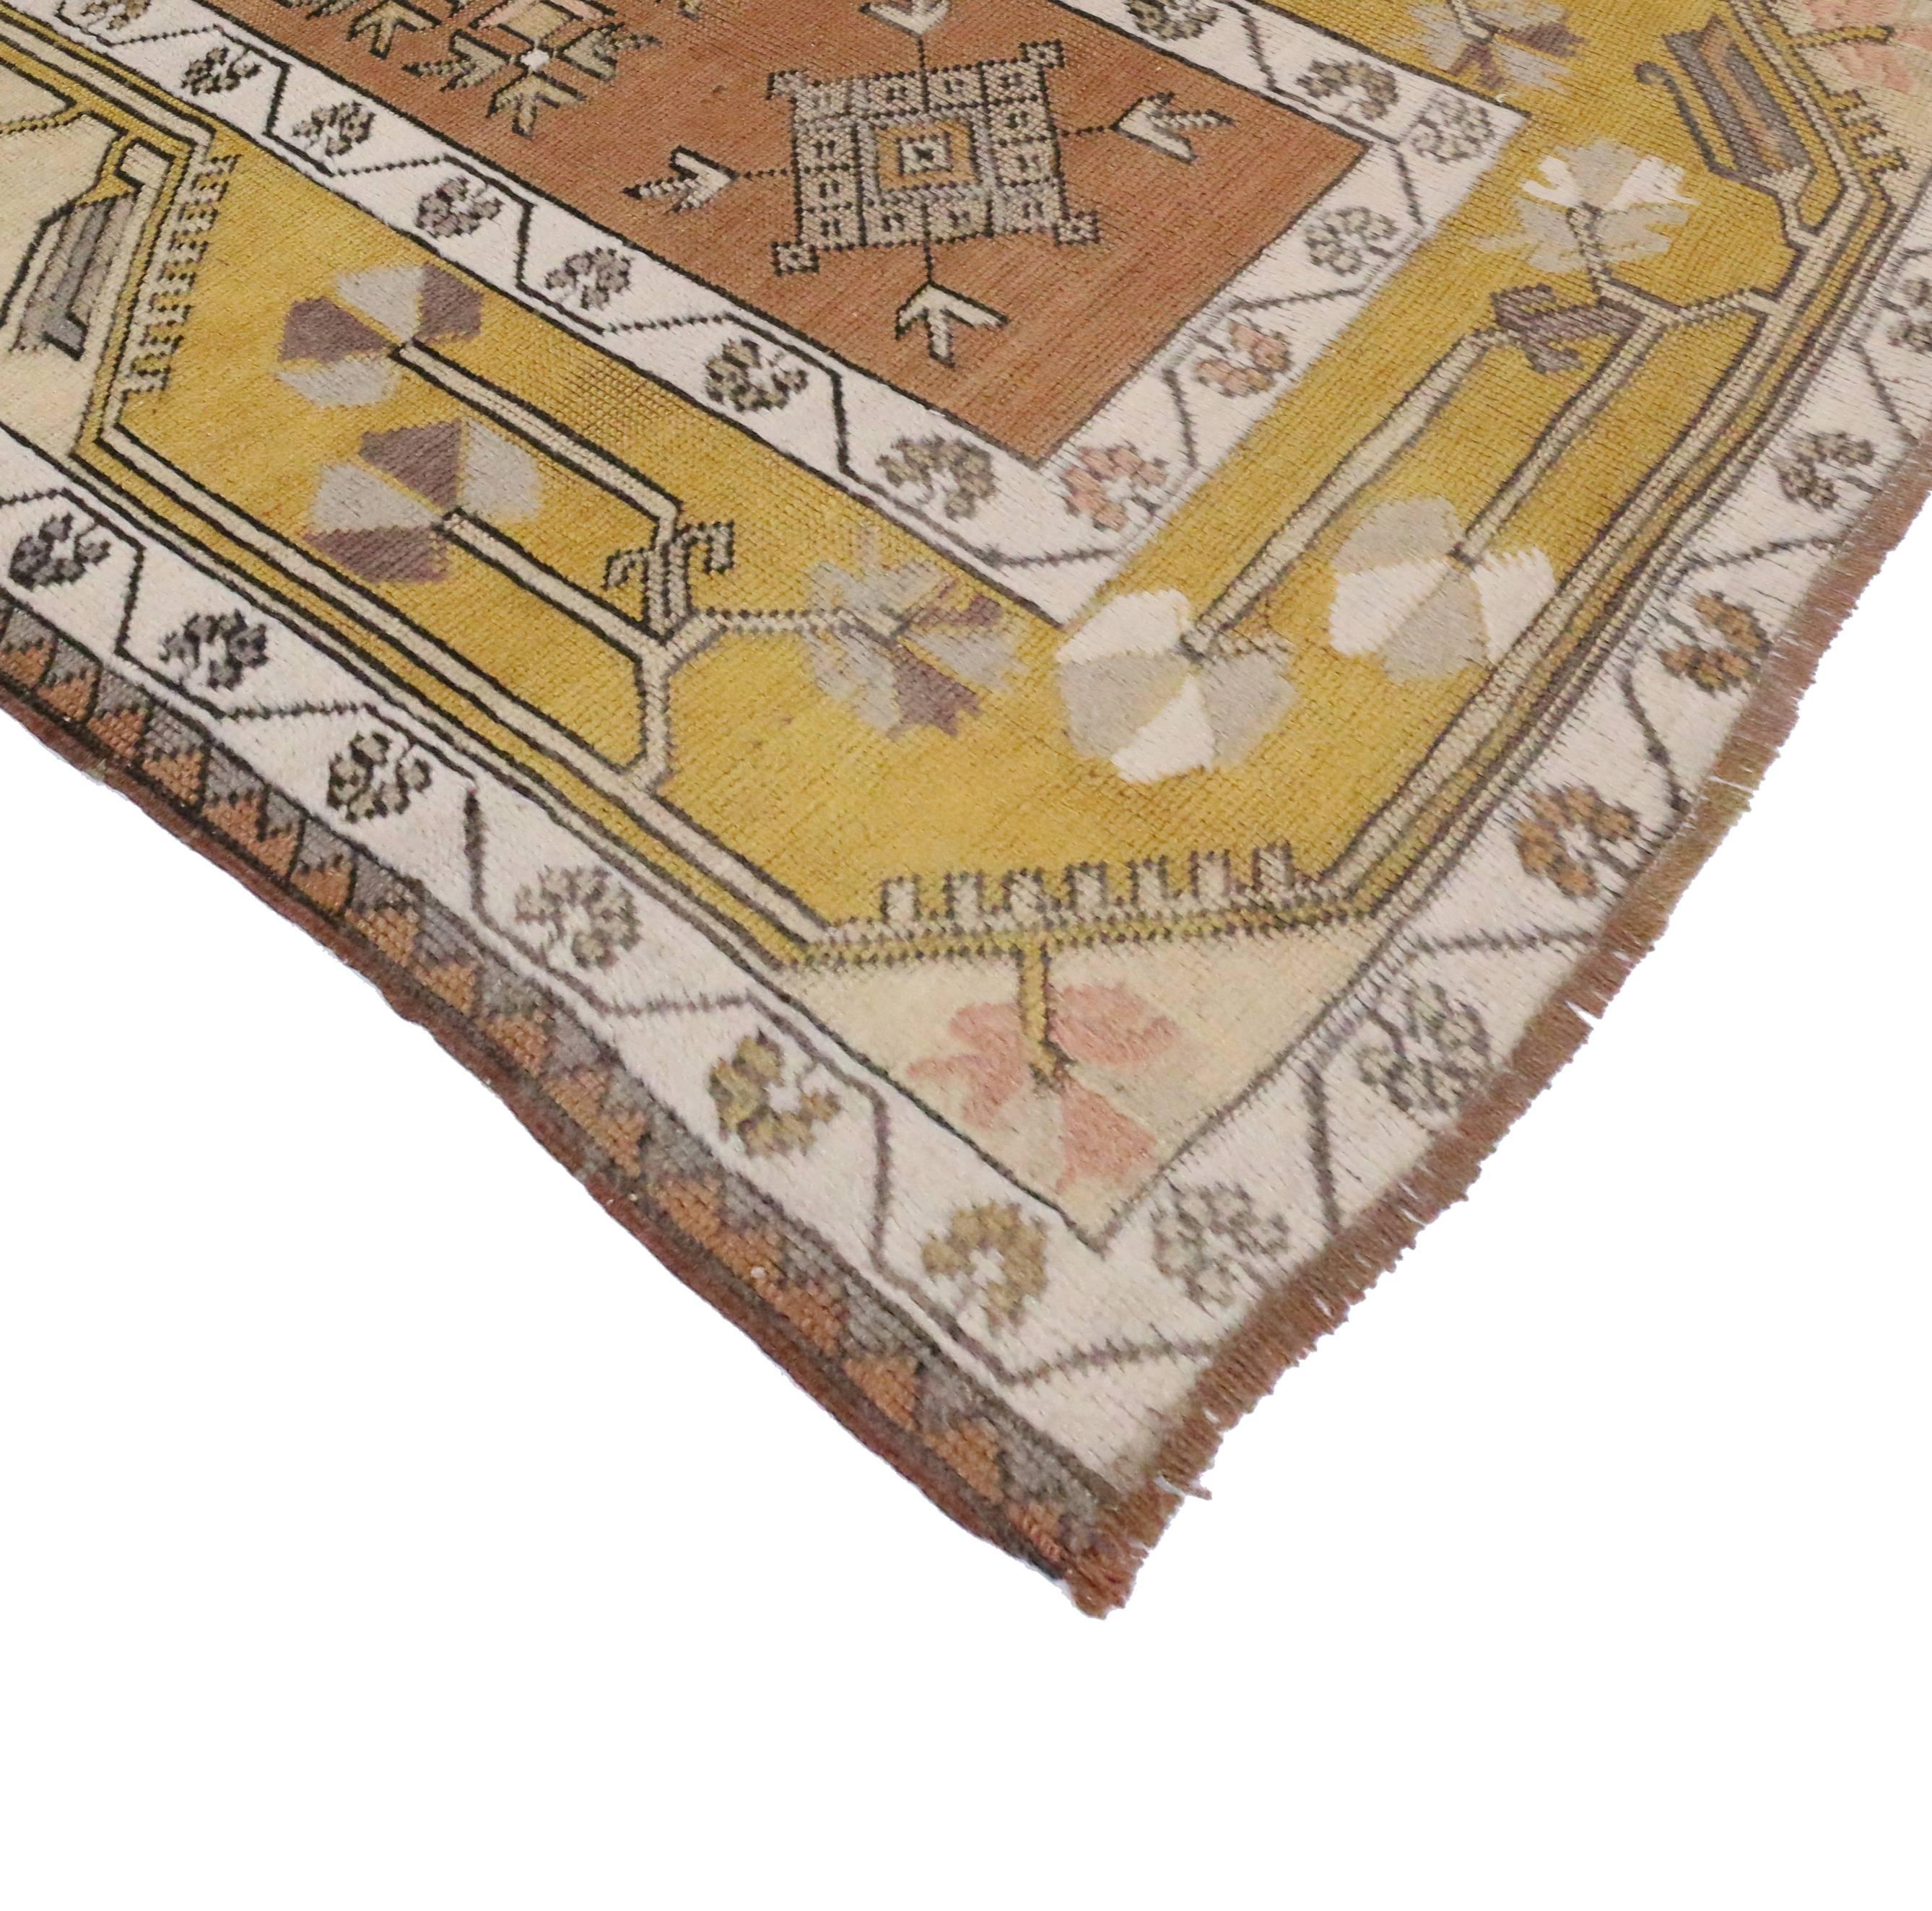 51405, vintage Oushak accent rug with stylized floral pattern. This tribal feel Oushak rug features a rectilinear field of dusty red clay with optical diamonds paired with alternating figures composed of arrows. The centre lozenge is bordered in